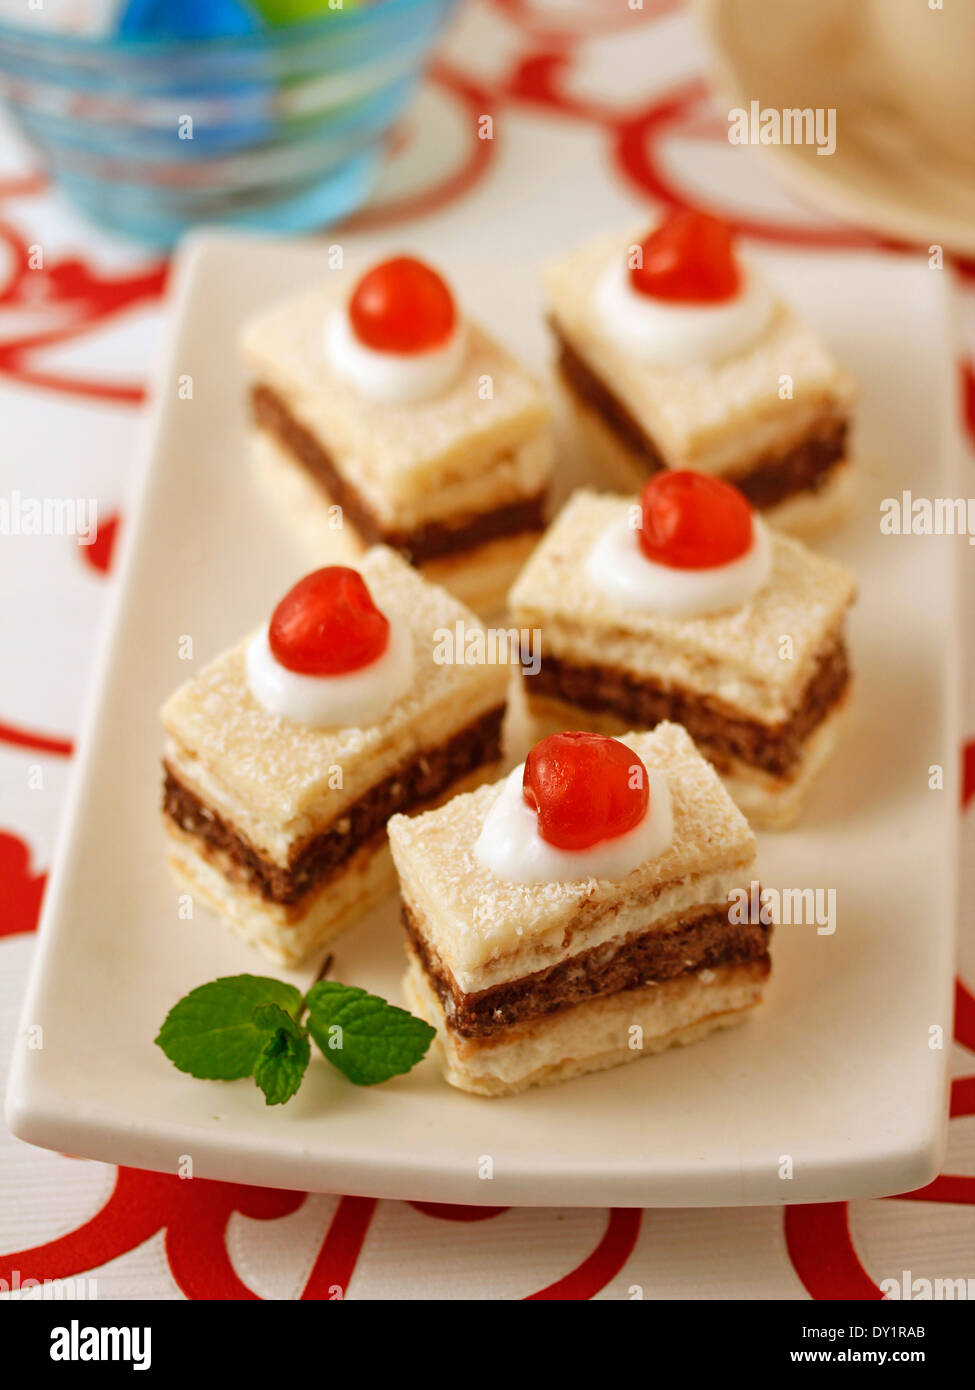 Sponge cakes with chocolate and cherries. Recipe available. Stock Photo